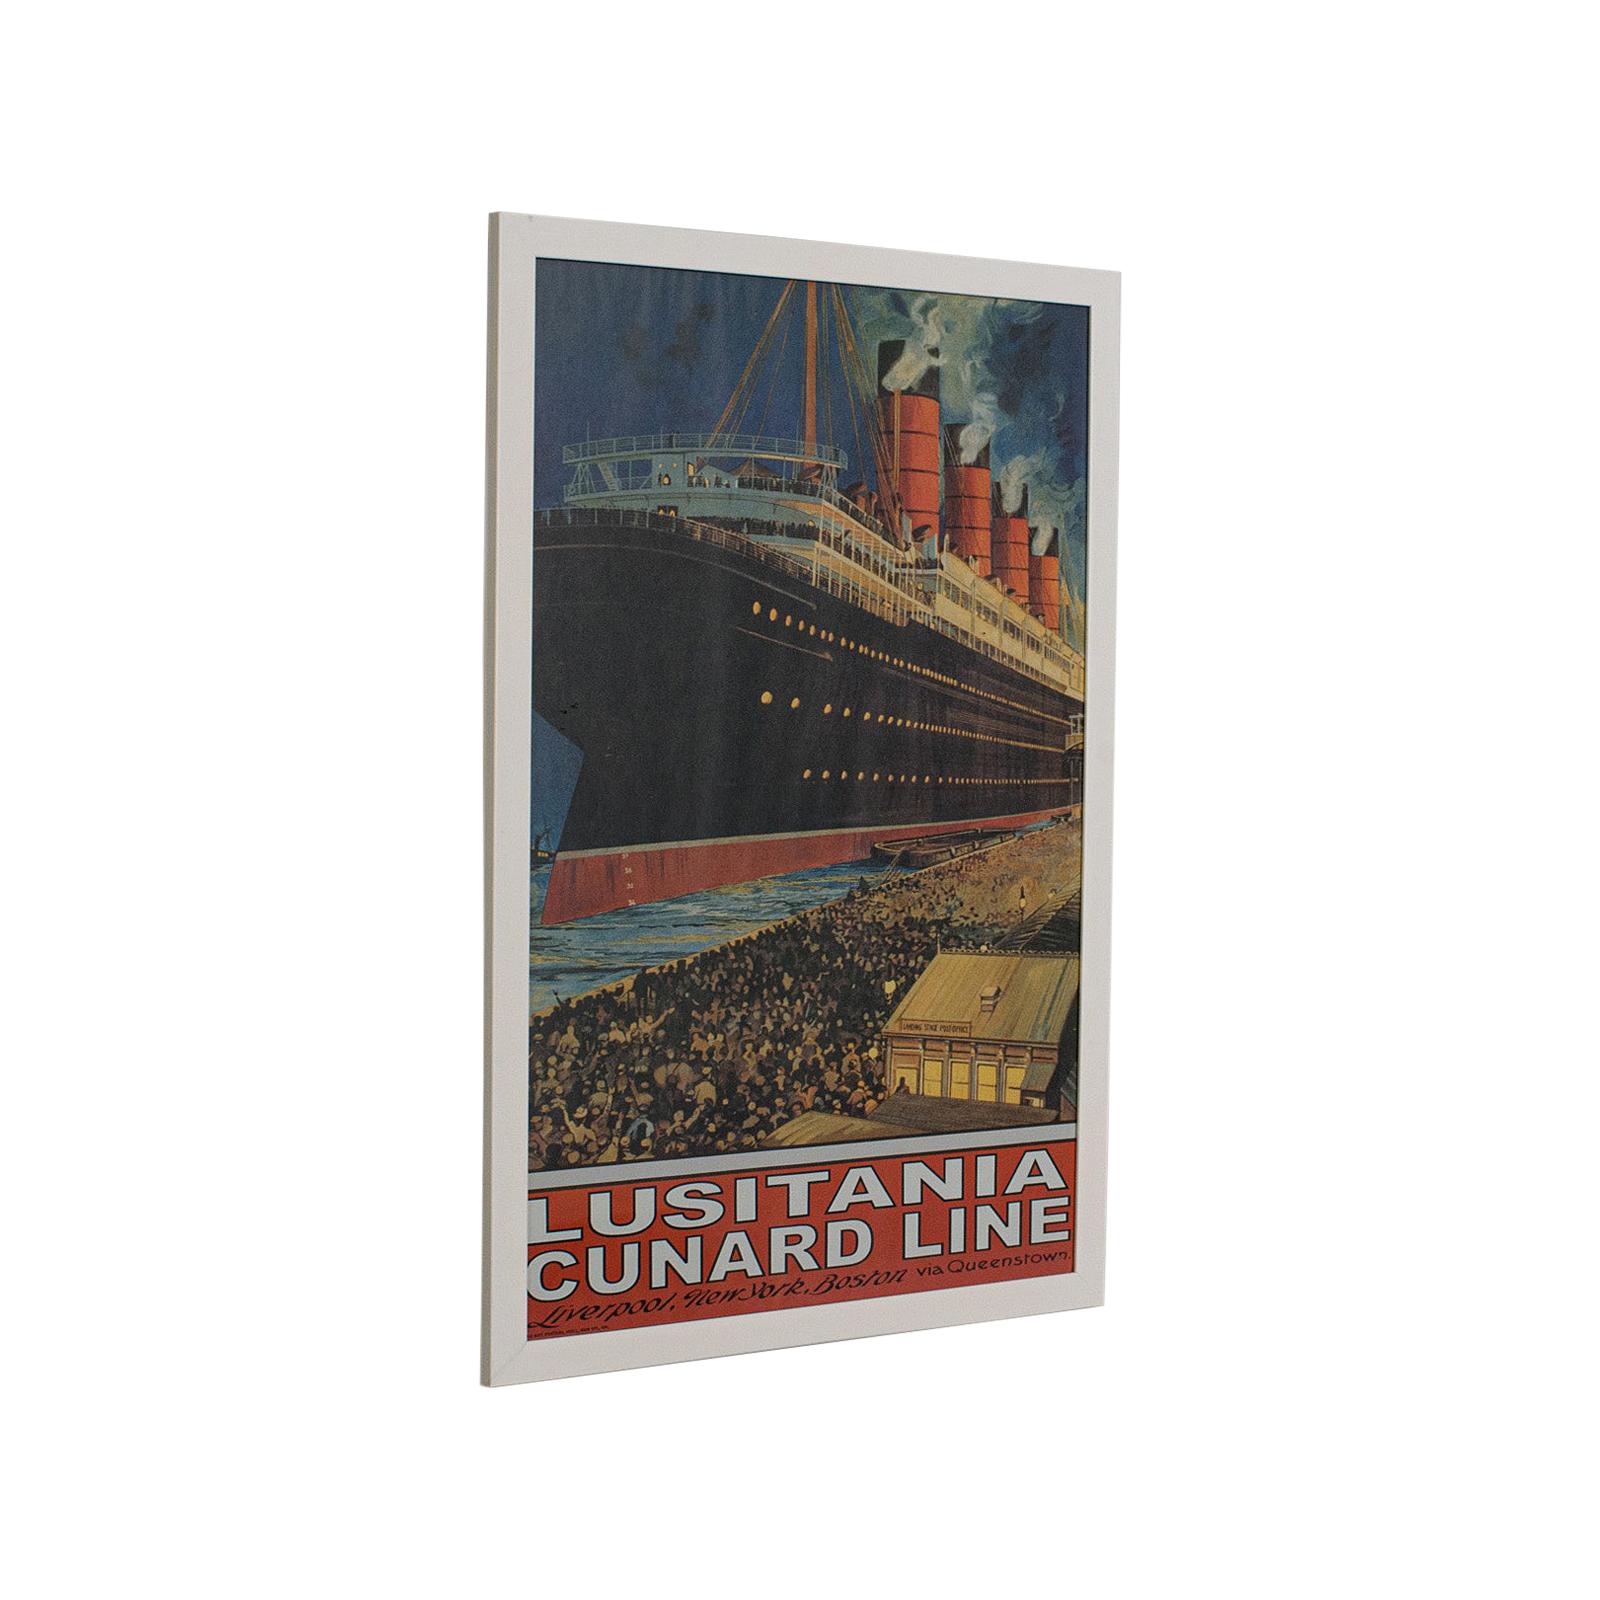 SEA CRUISE CUNARD 10 VINTAGE TRAVEL POSTER GALLERY WRAP 